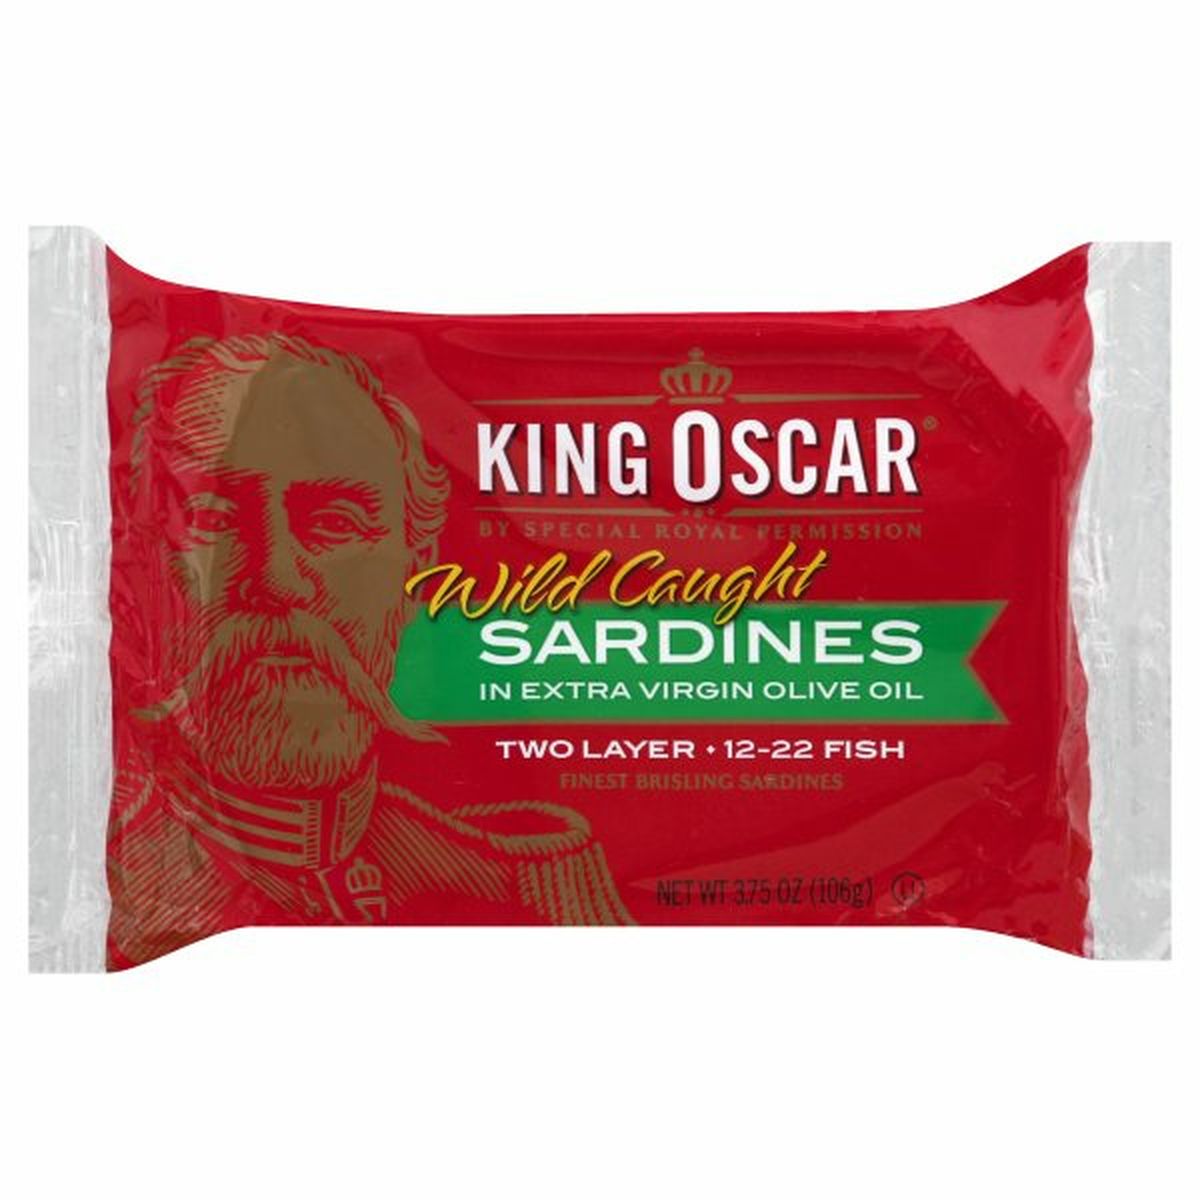 Calories in King Oscar Sardines in Extra Virgin Olive Oil, Wild Caught